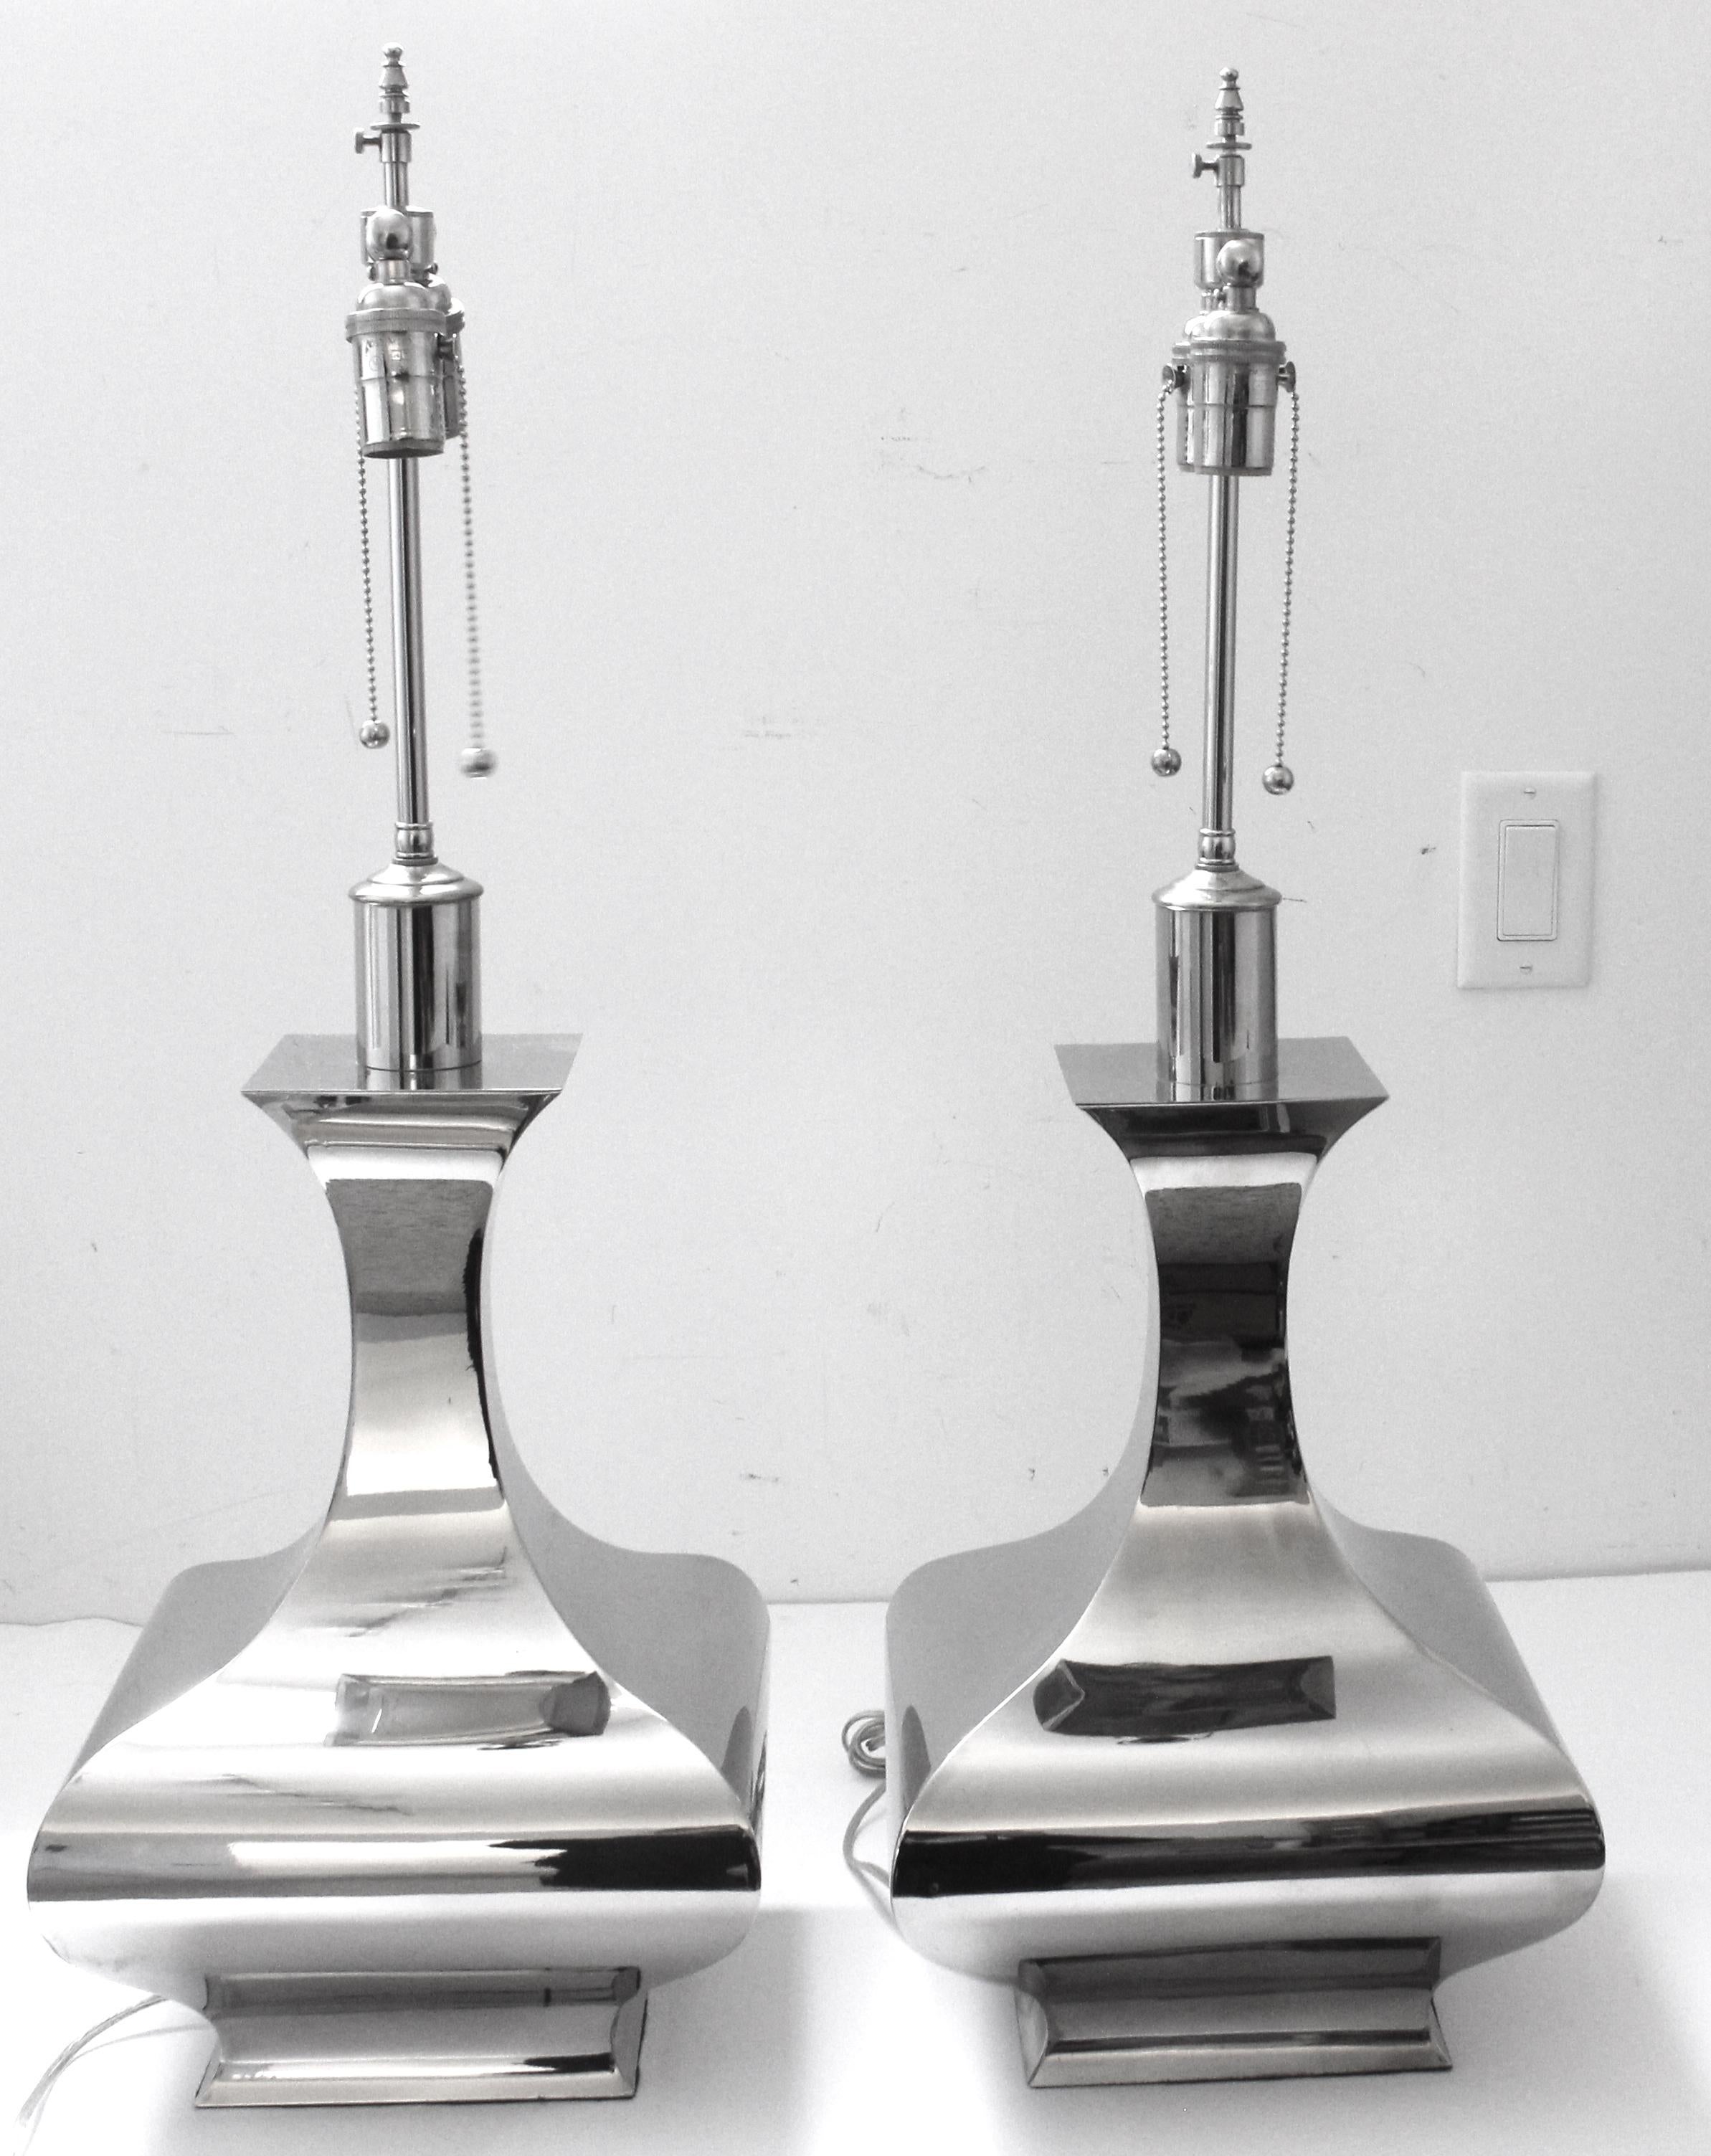 Unknown Pair of Stainless Steel Table Lamps For Sale